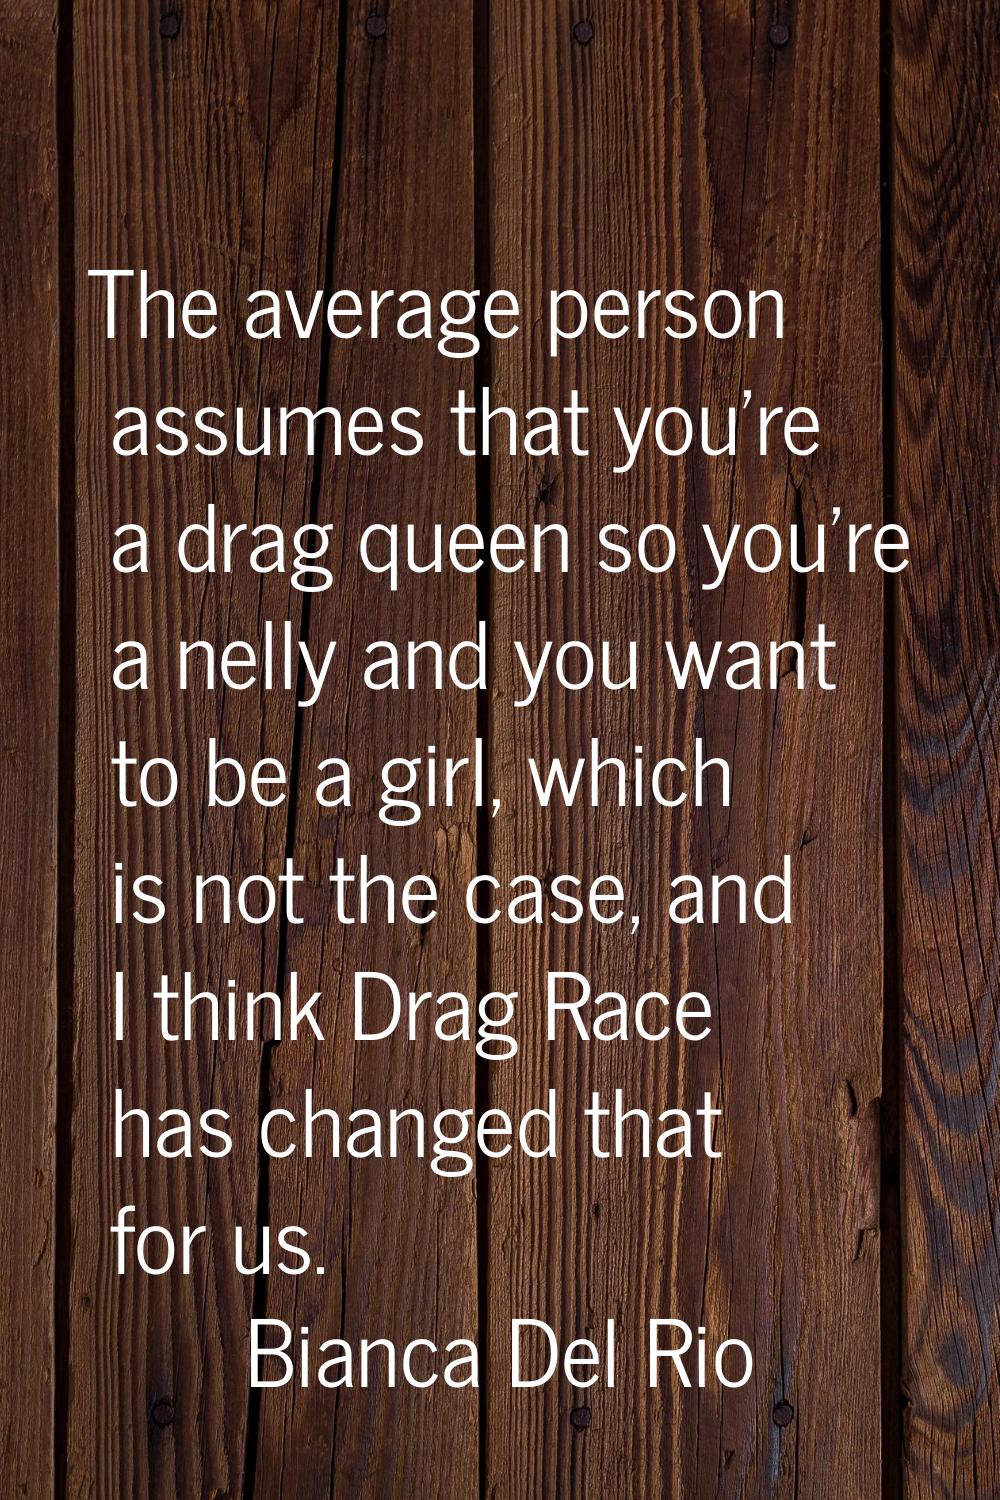 The average person assumes that you're a drag queen so you're a nelly and you want to be a girl, wh